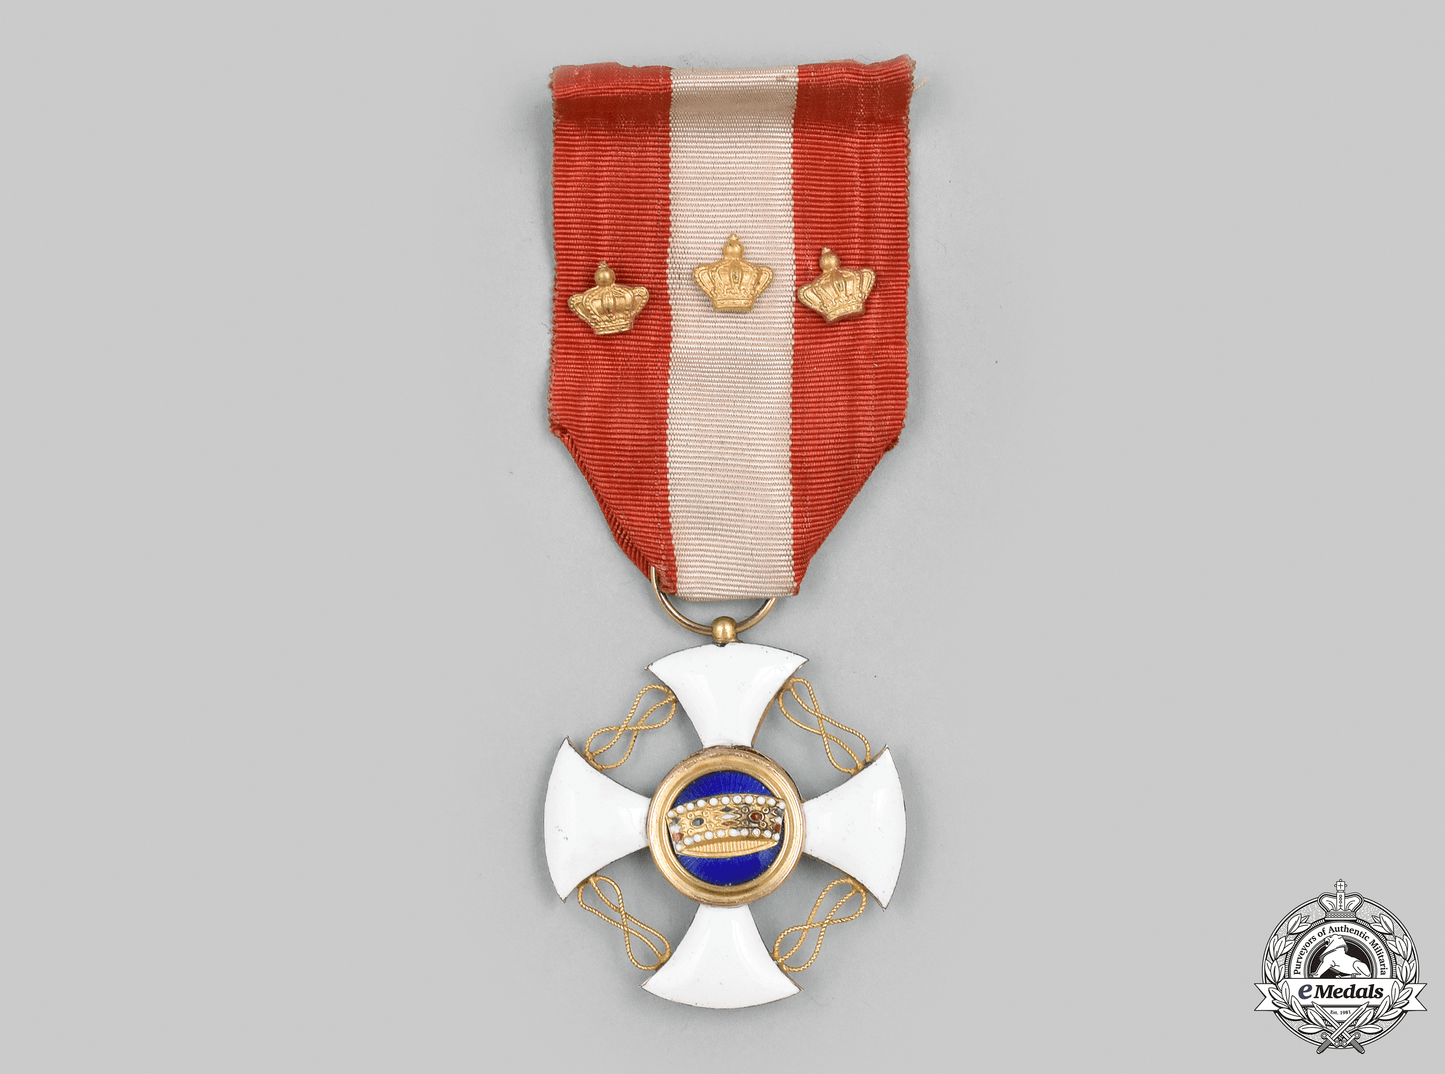 italy,_kingdom._an_order_of_the_crown_in_gold,_v_class_knight_with3_crowns,_c.1920_m21_mnc3451_1